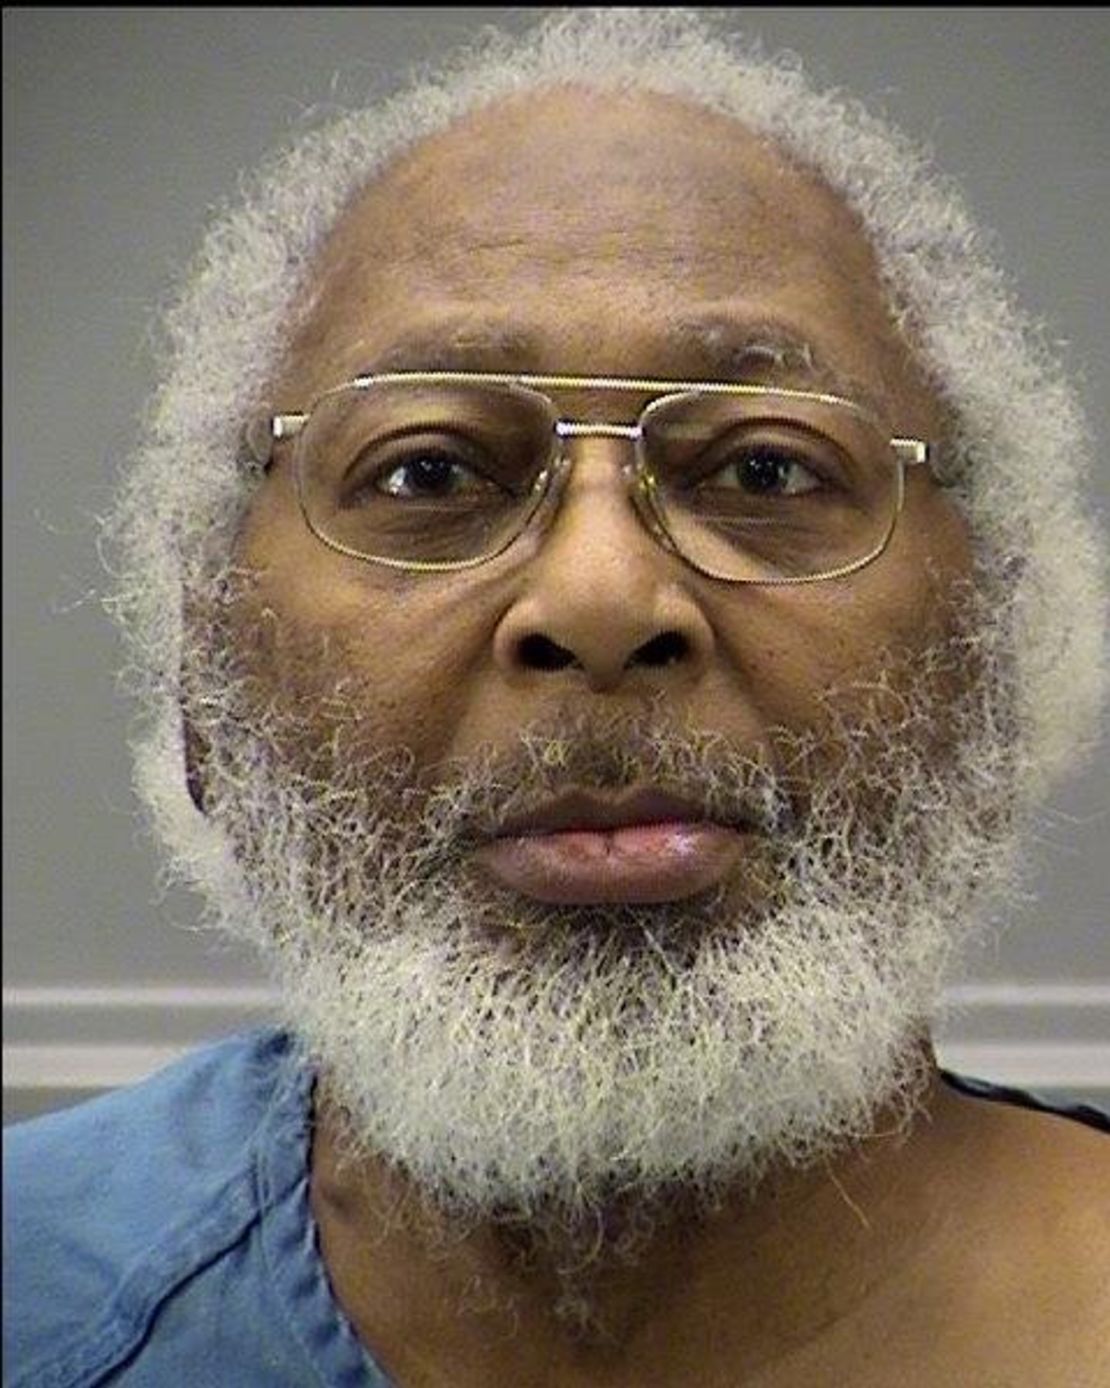 Daniel Schooler, 68, is accused of gunning down his brother in the church where he preached.